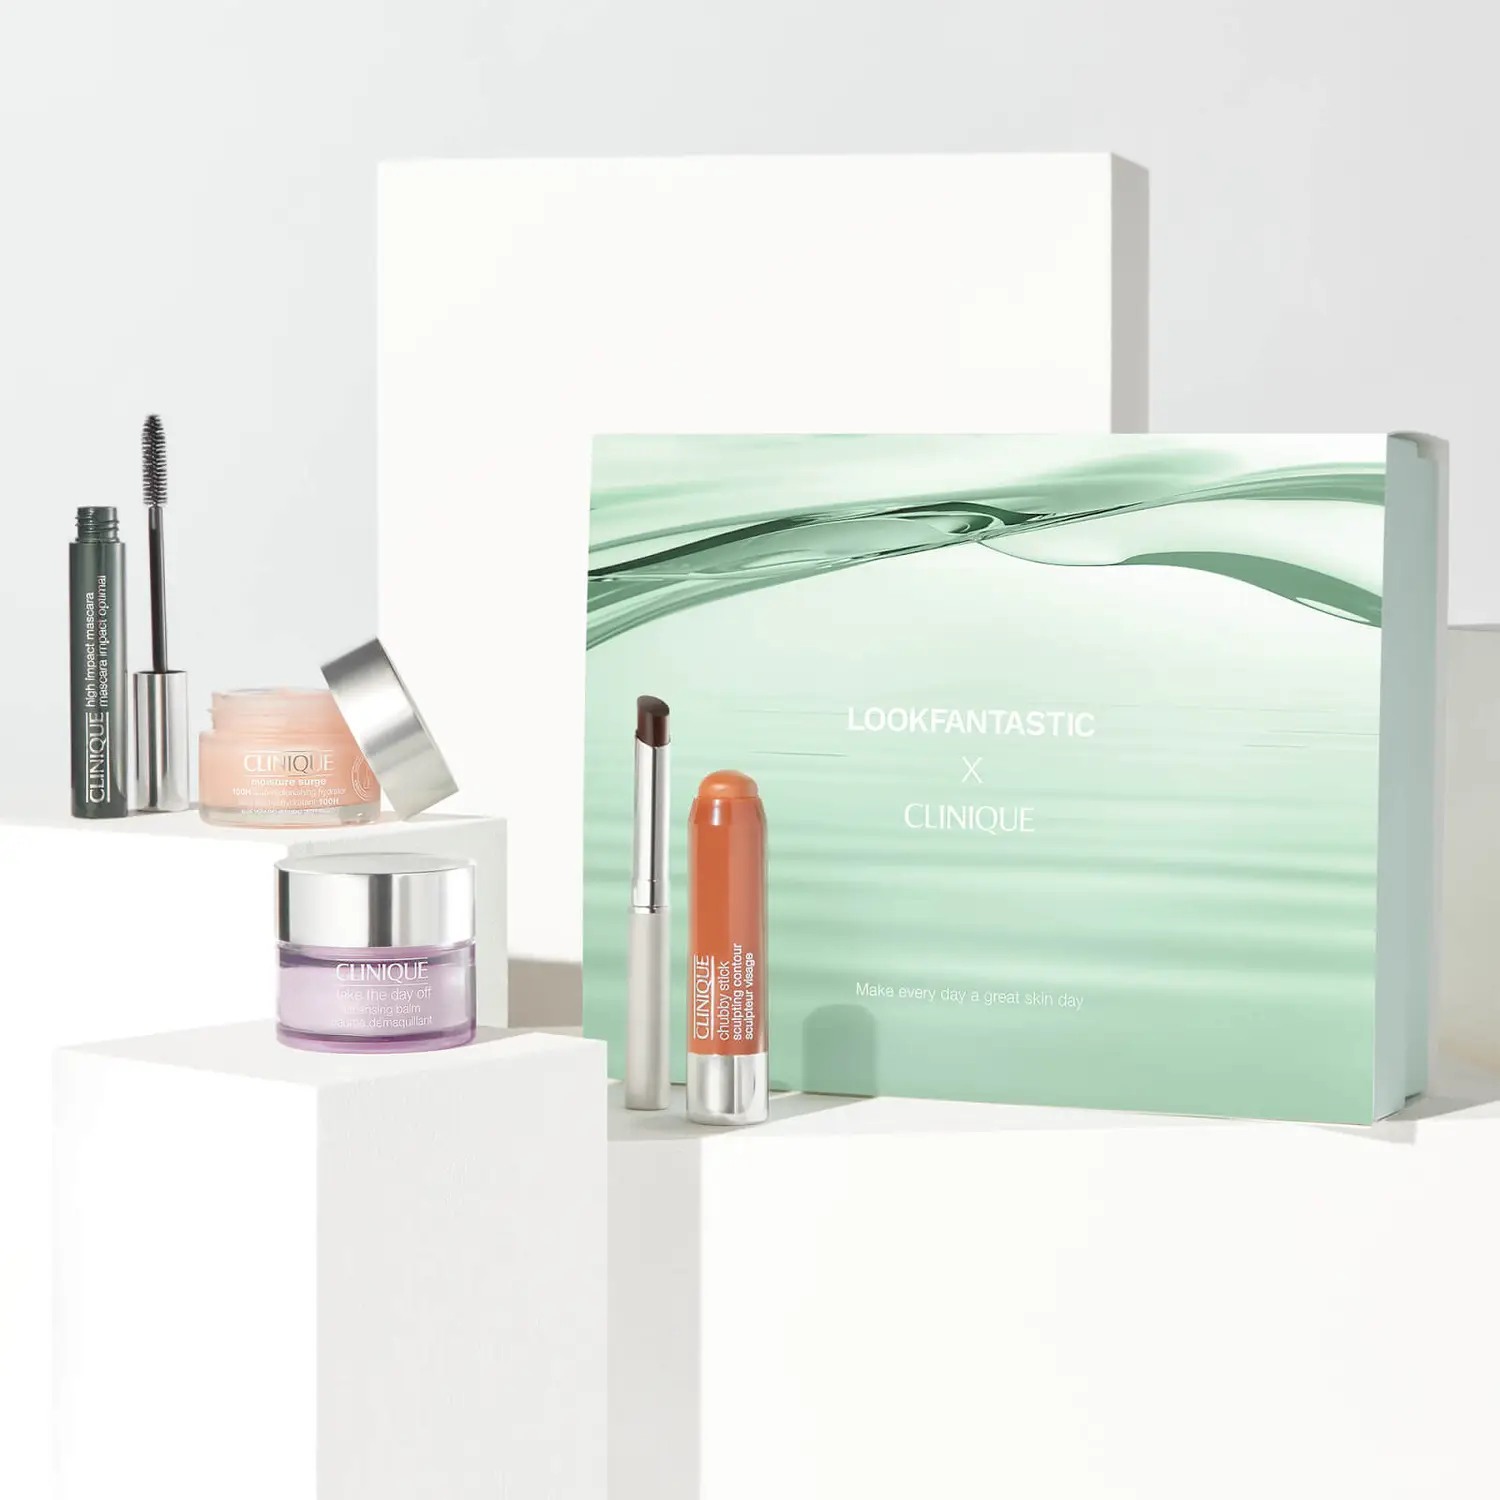 LOOKFANTASTIC x Clinique Limited Edition Beauty Box 